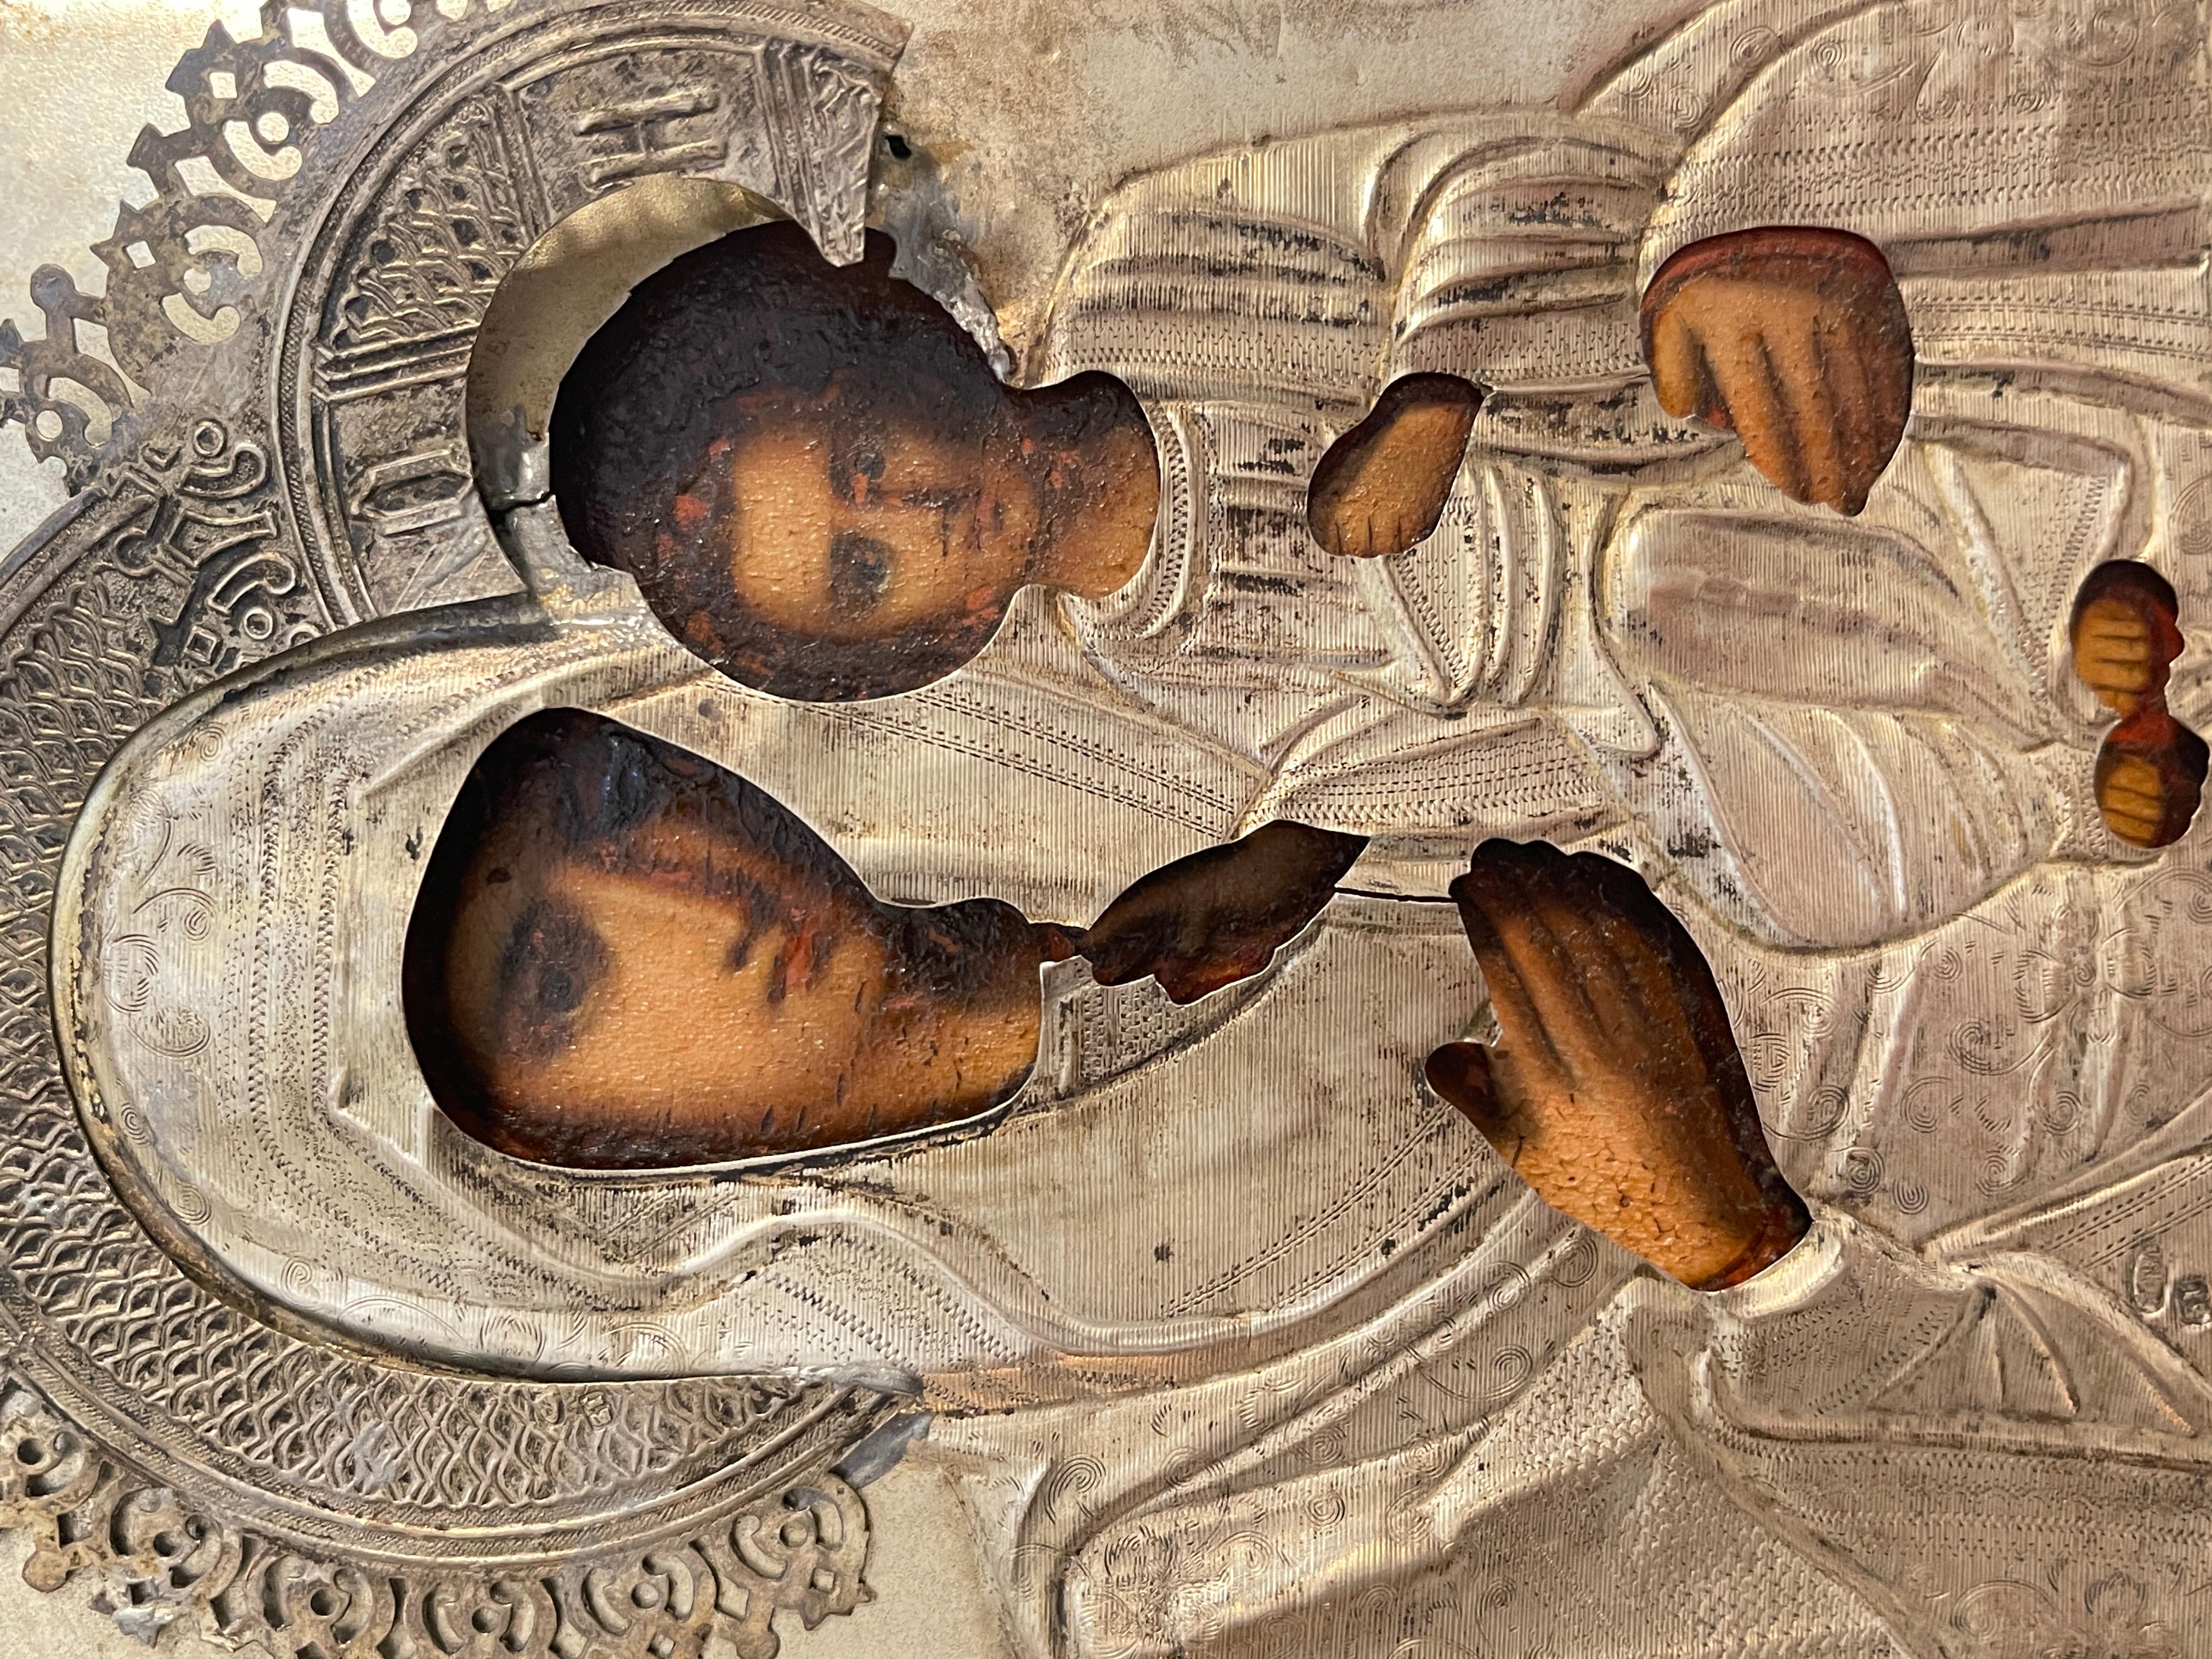 Ancient icon of fine workmanship, dating back to the 19th century, Russian. The icon represents the Madonna in the center with the Child, covered with silver riza.
In good condition, as shown in the photos, some defects and signs of wear due to